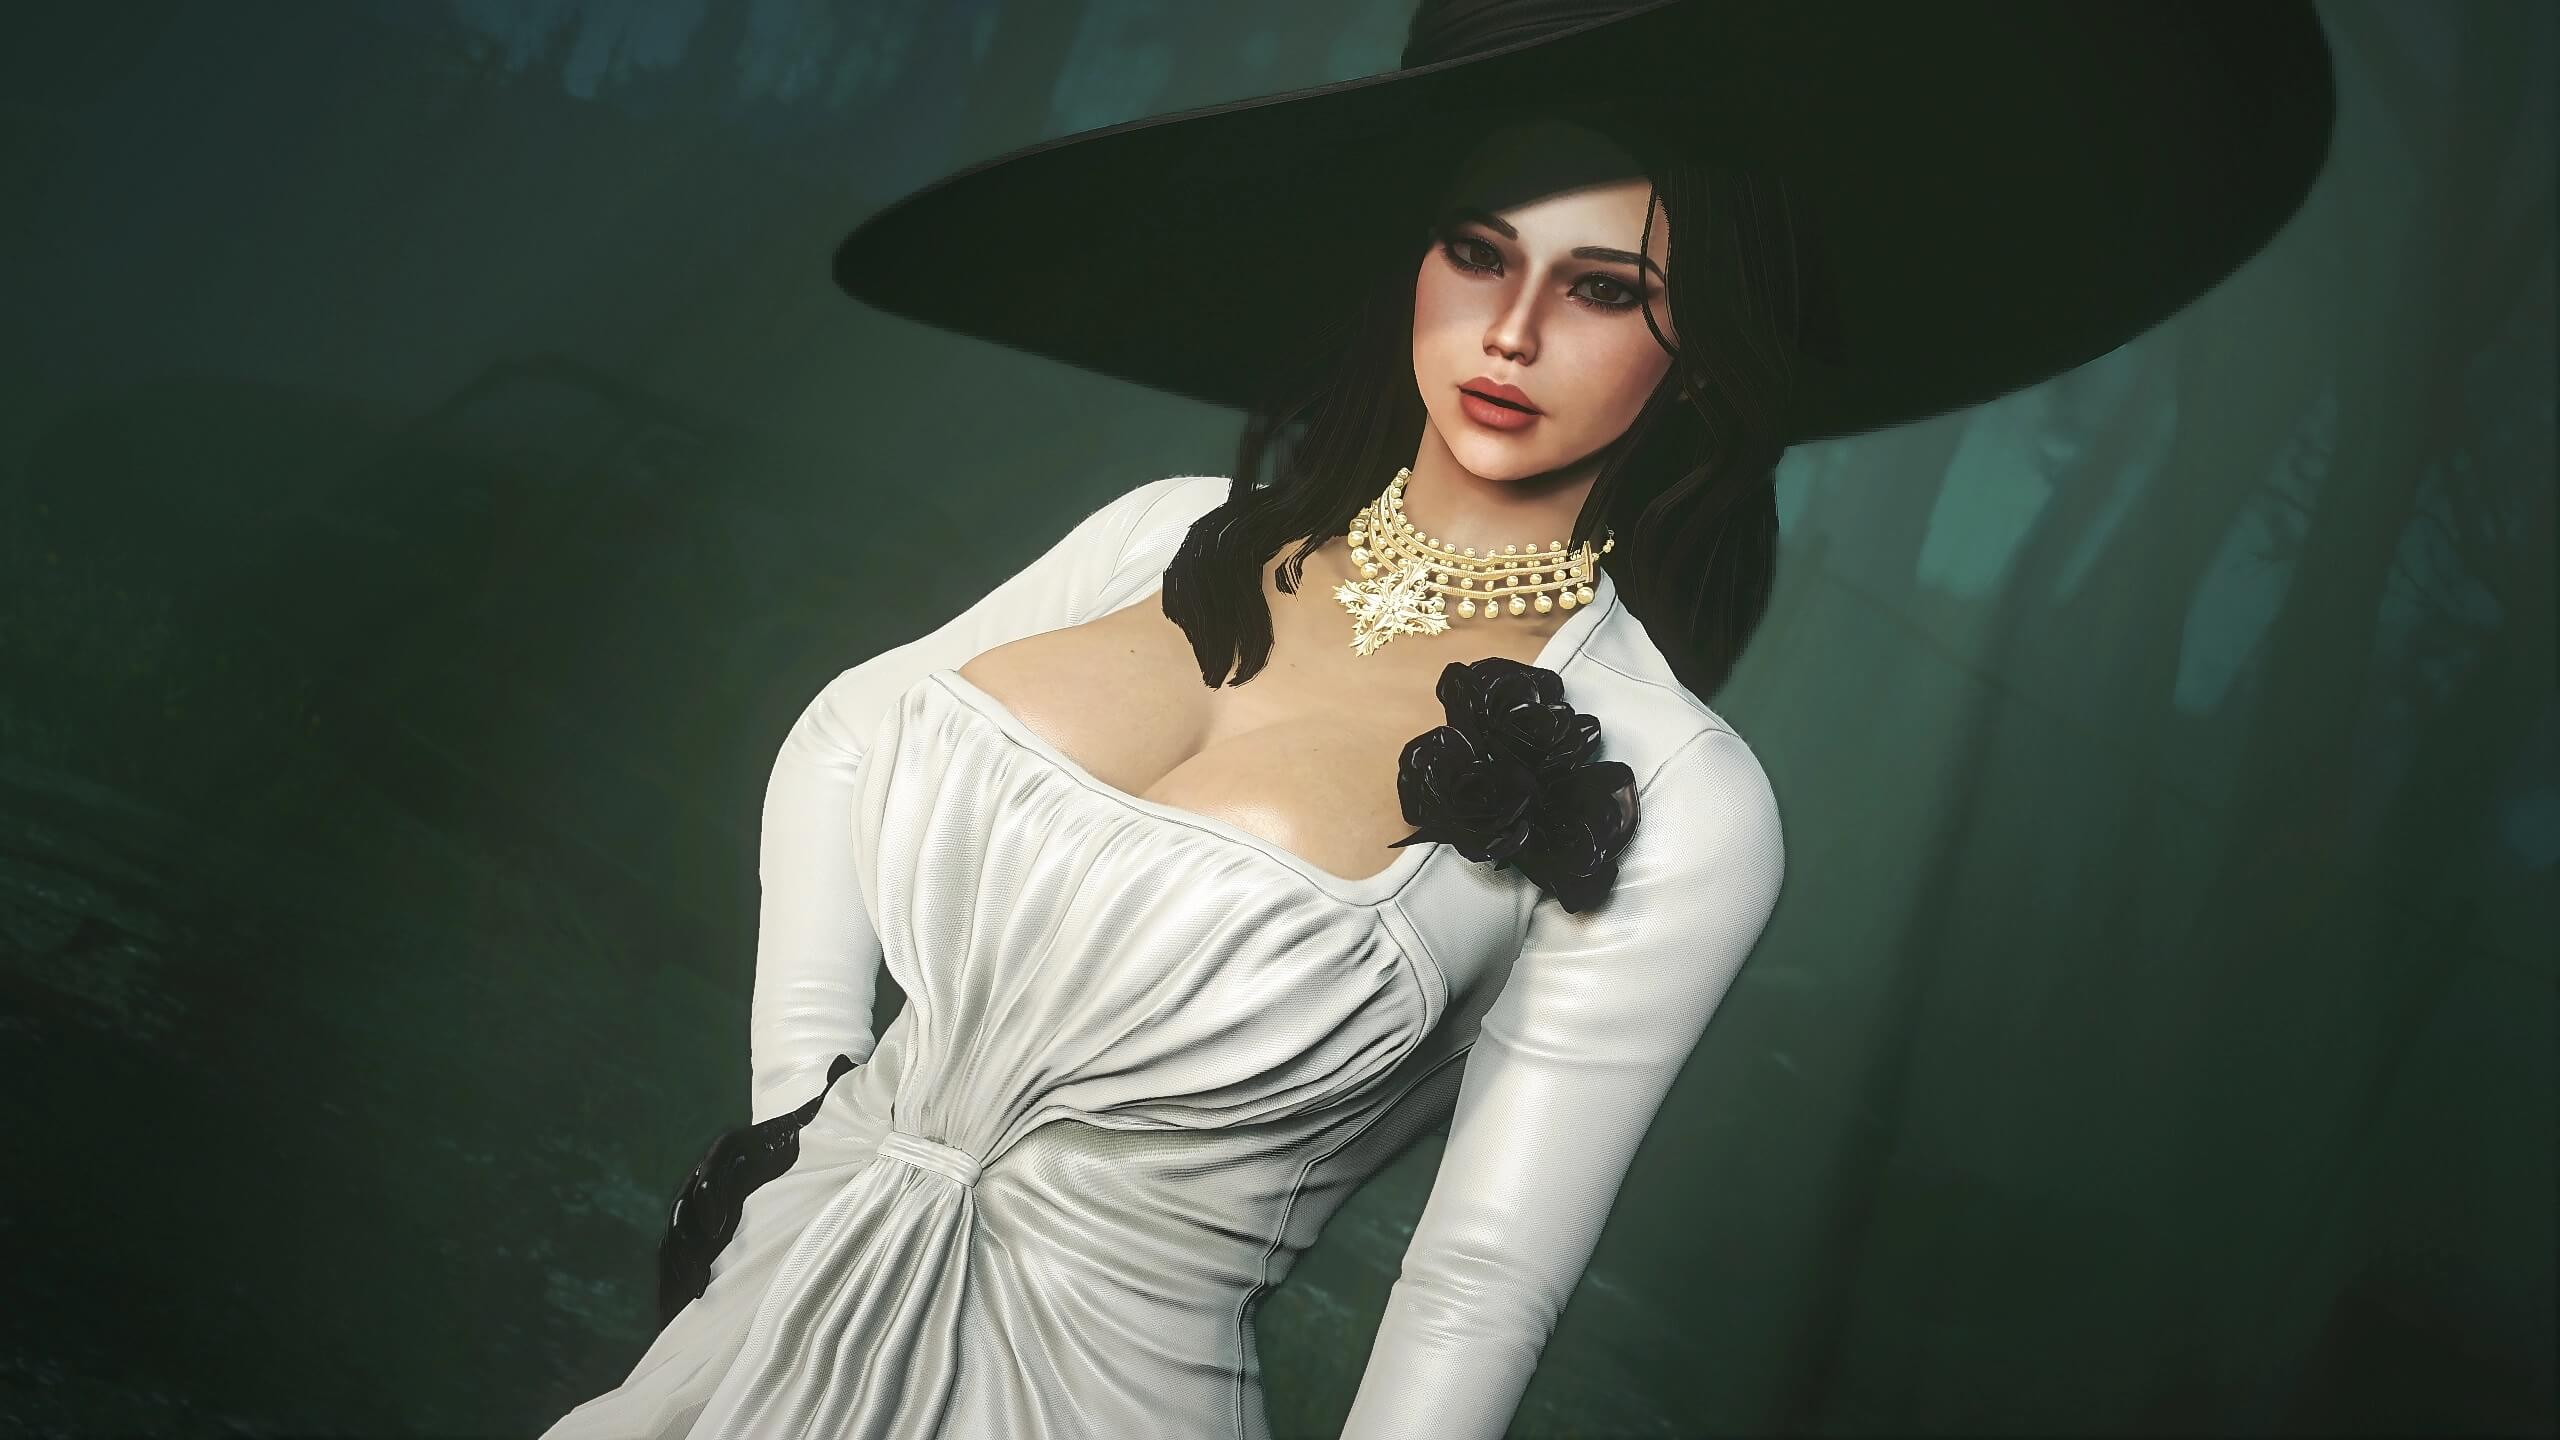 This mod brings Resident Evil Village's Lady Dimitrescu to Fallout 4